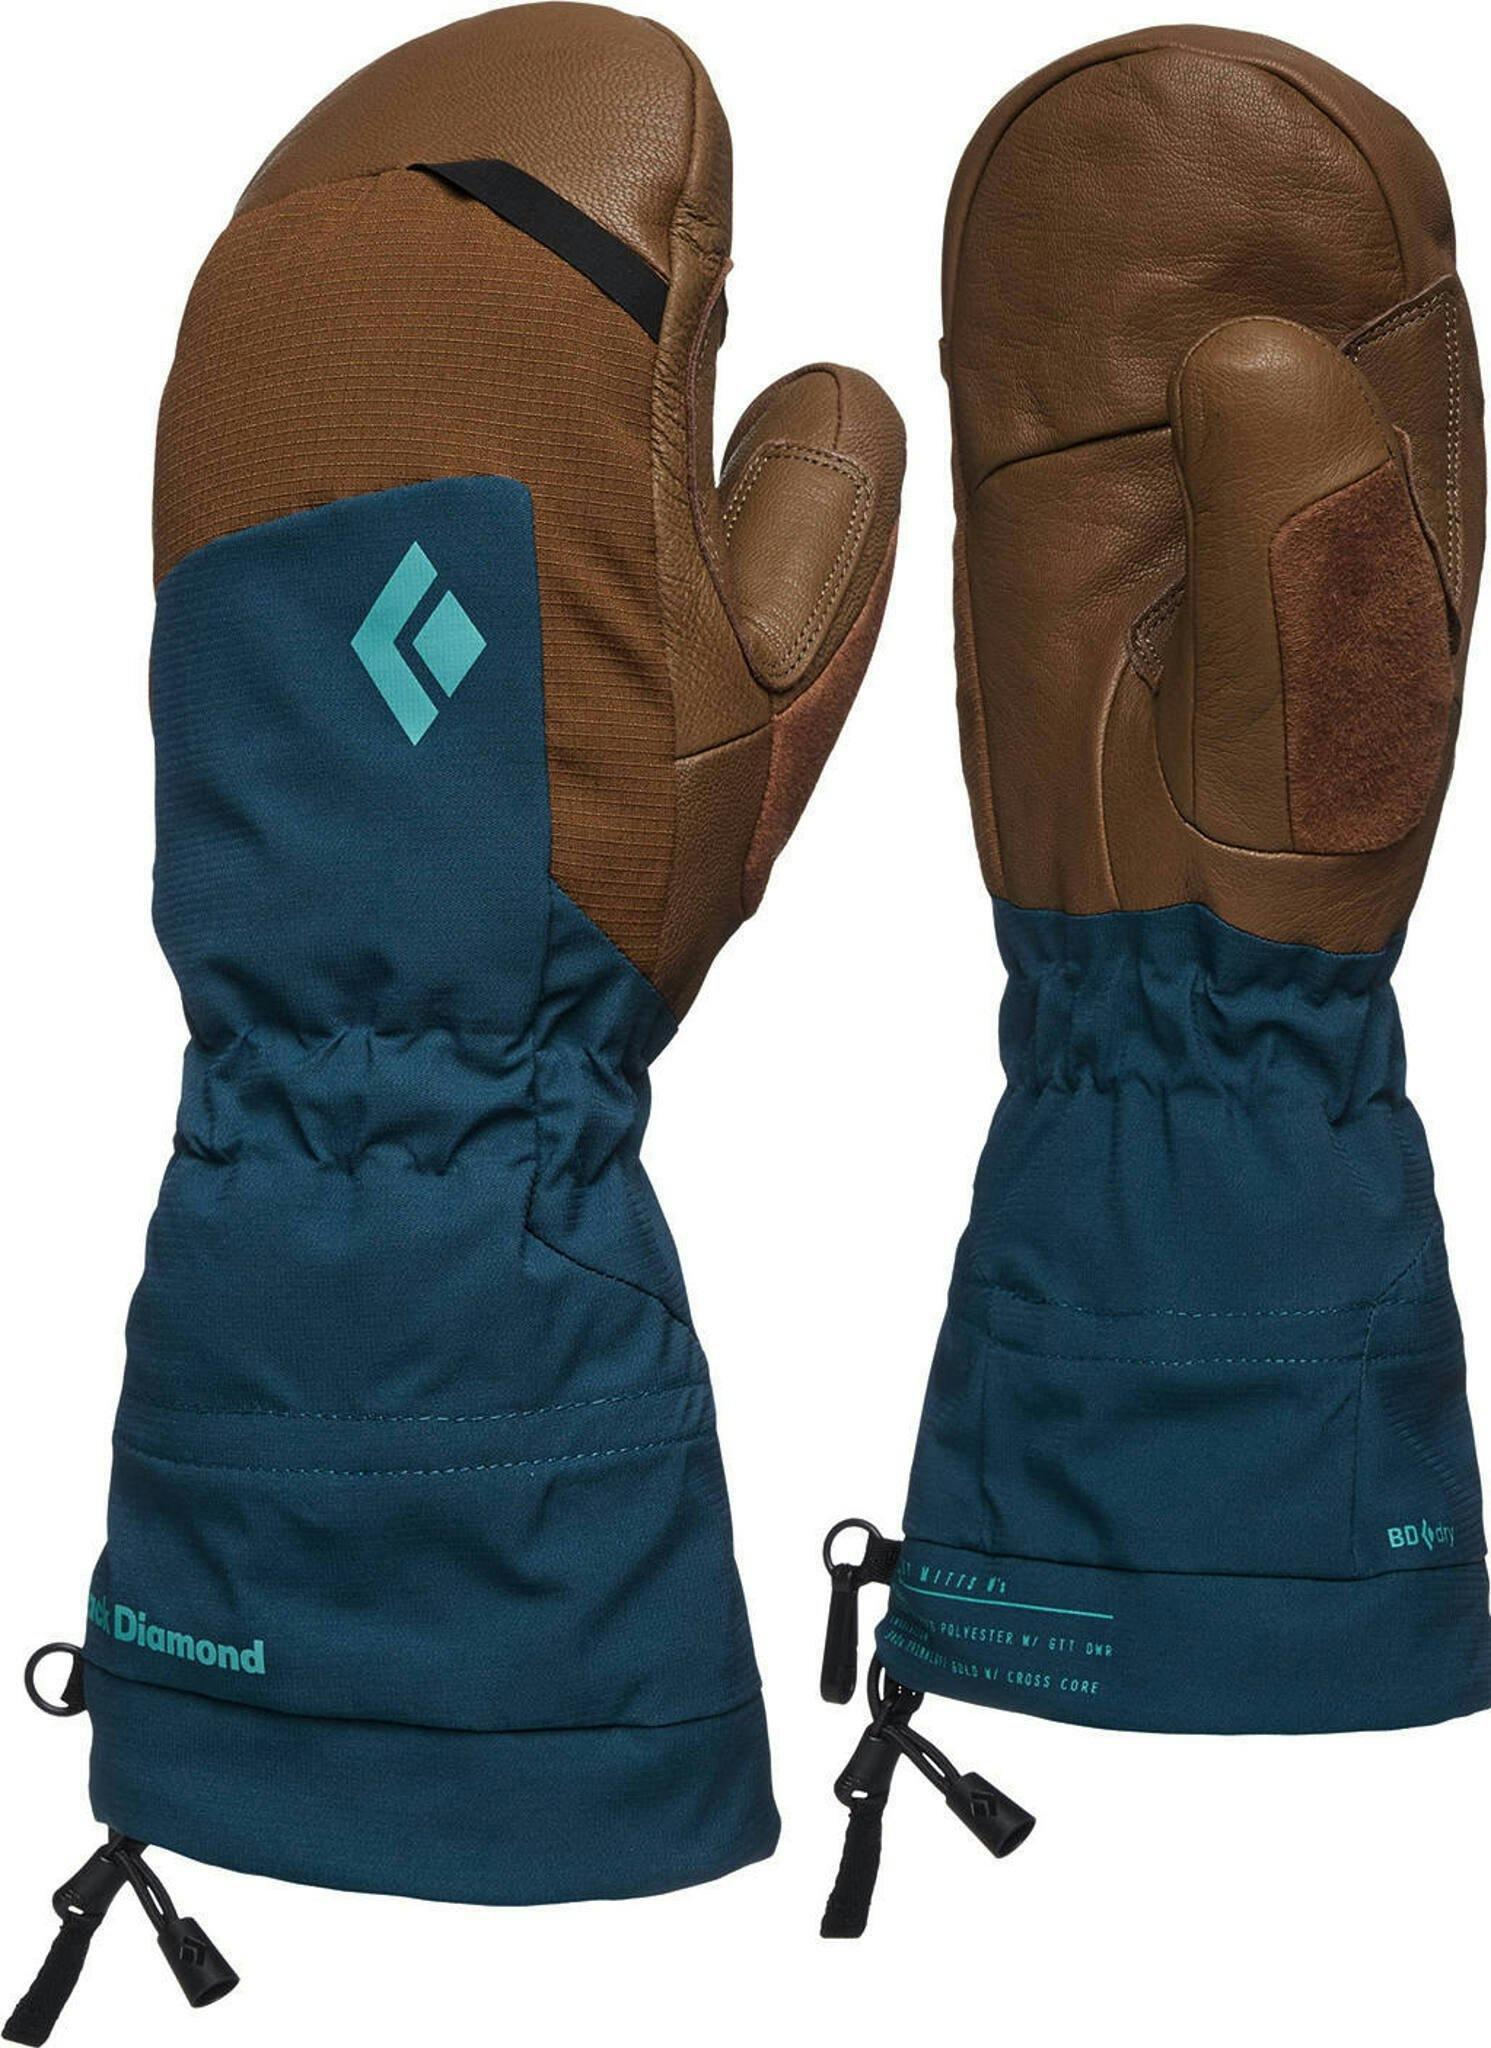 Product image for Mercury Mitts - Women's